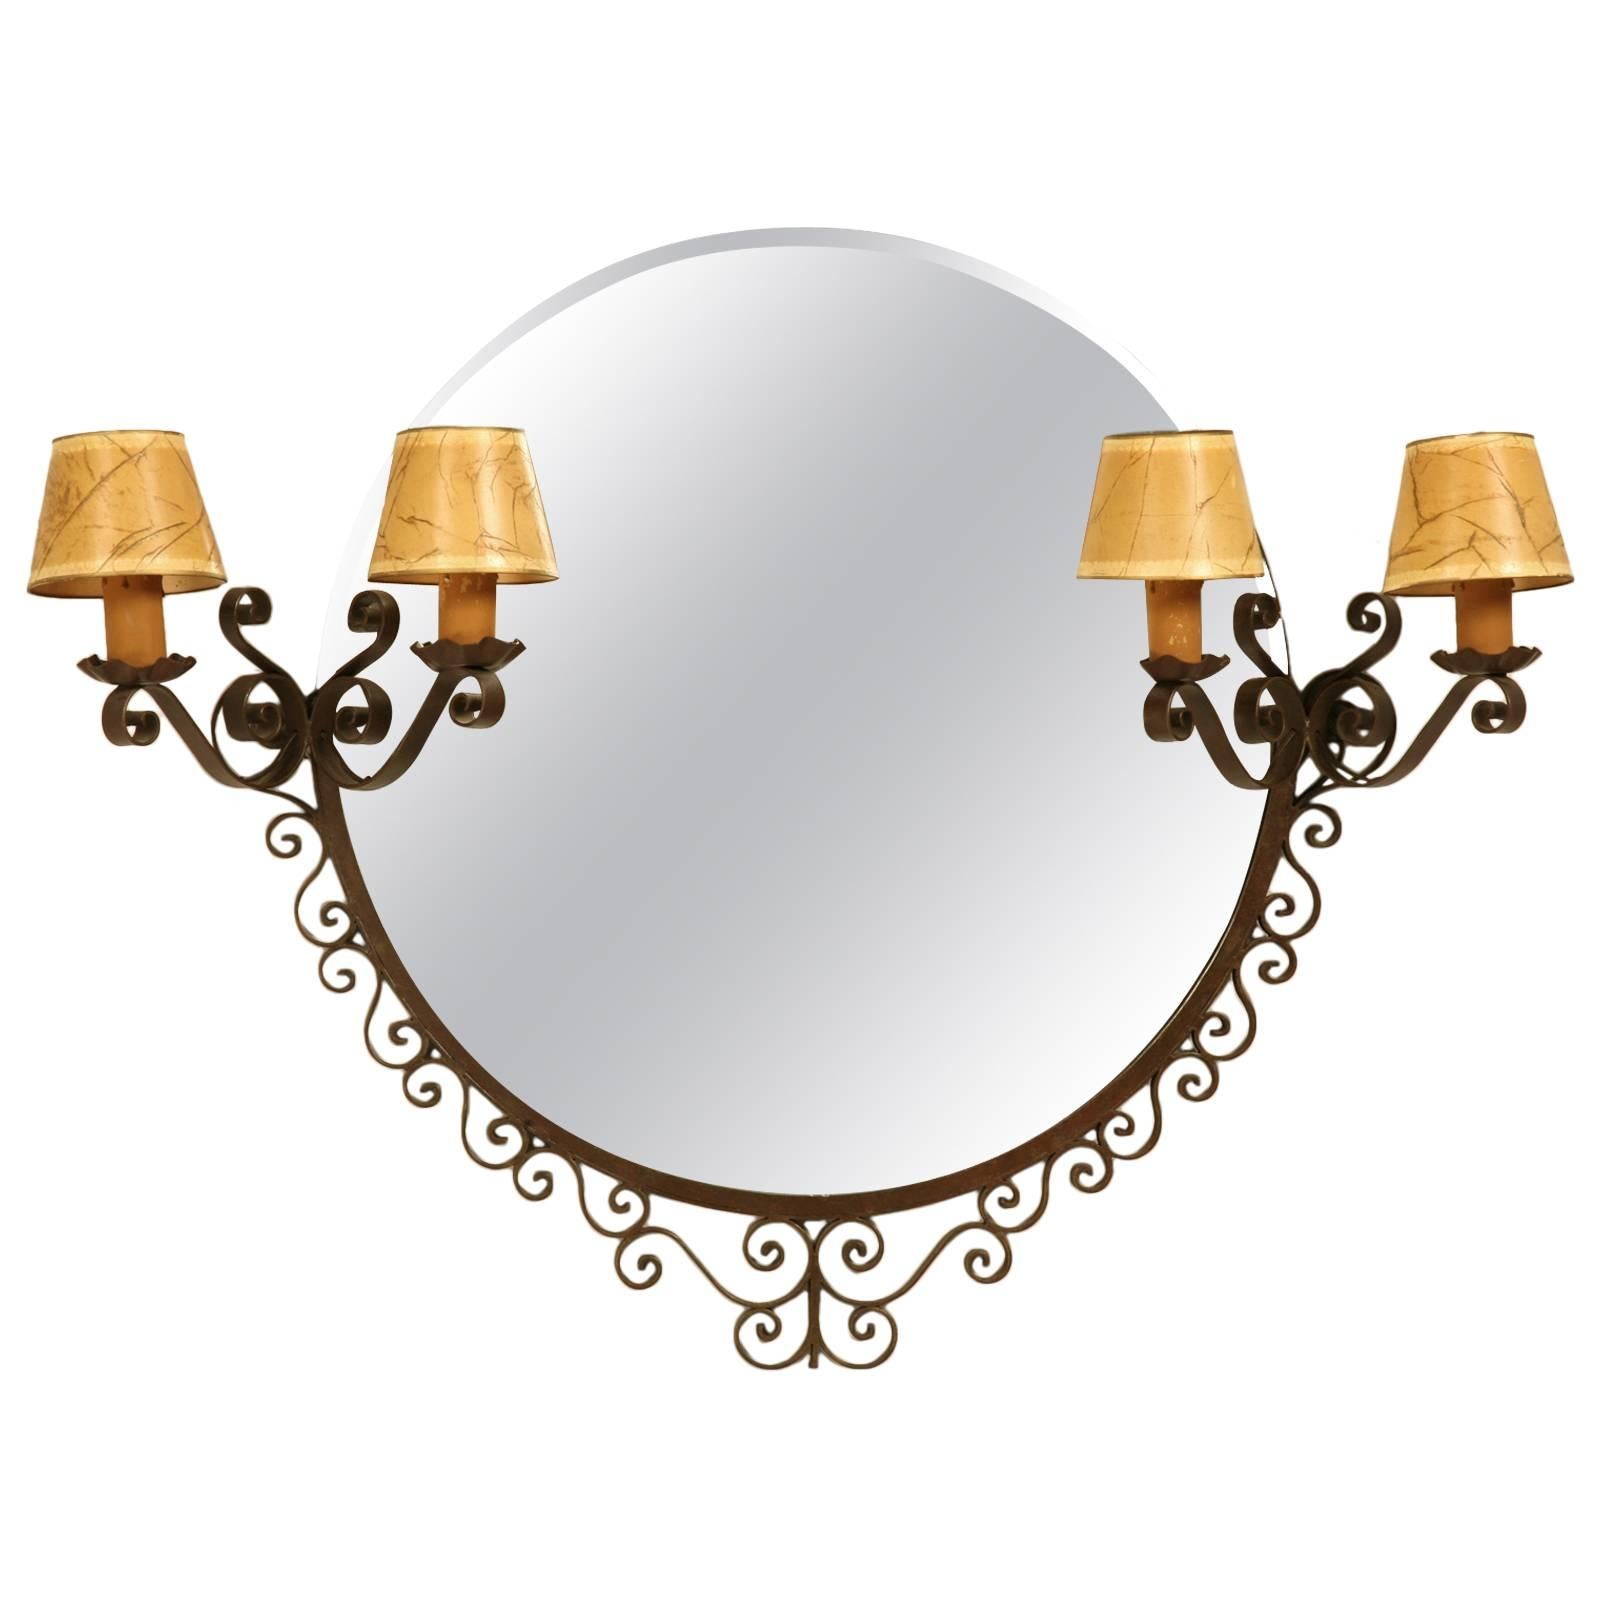 French Art Deco Round Mirror with Built-in Sconces circa 1930's